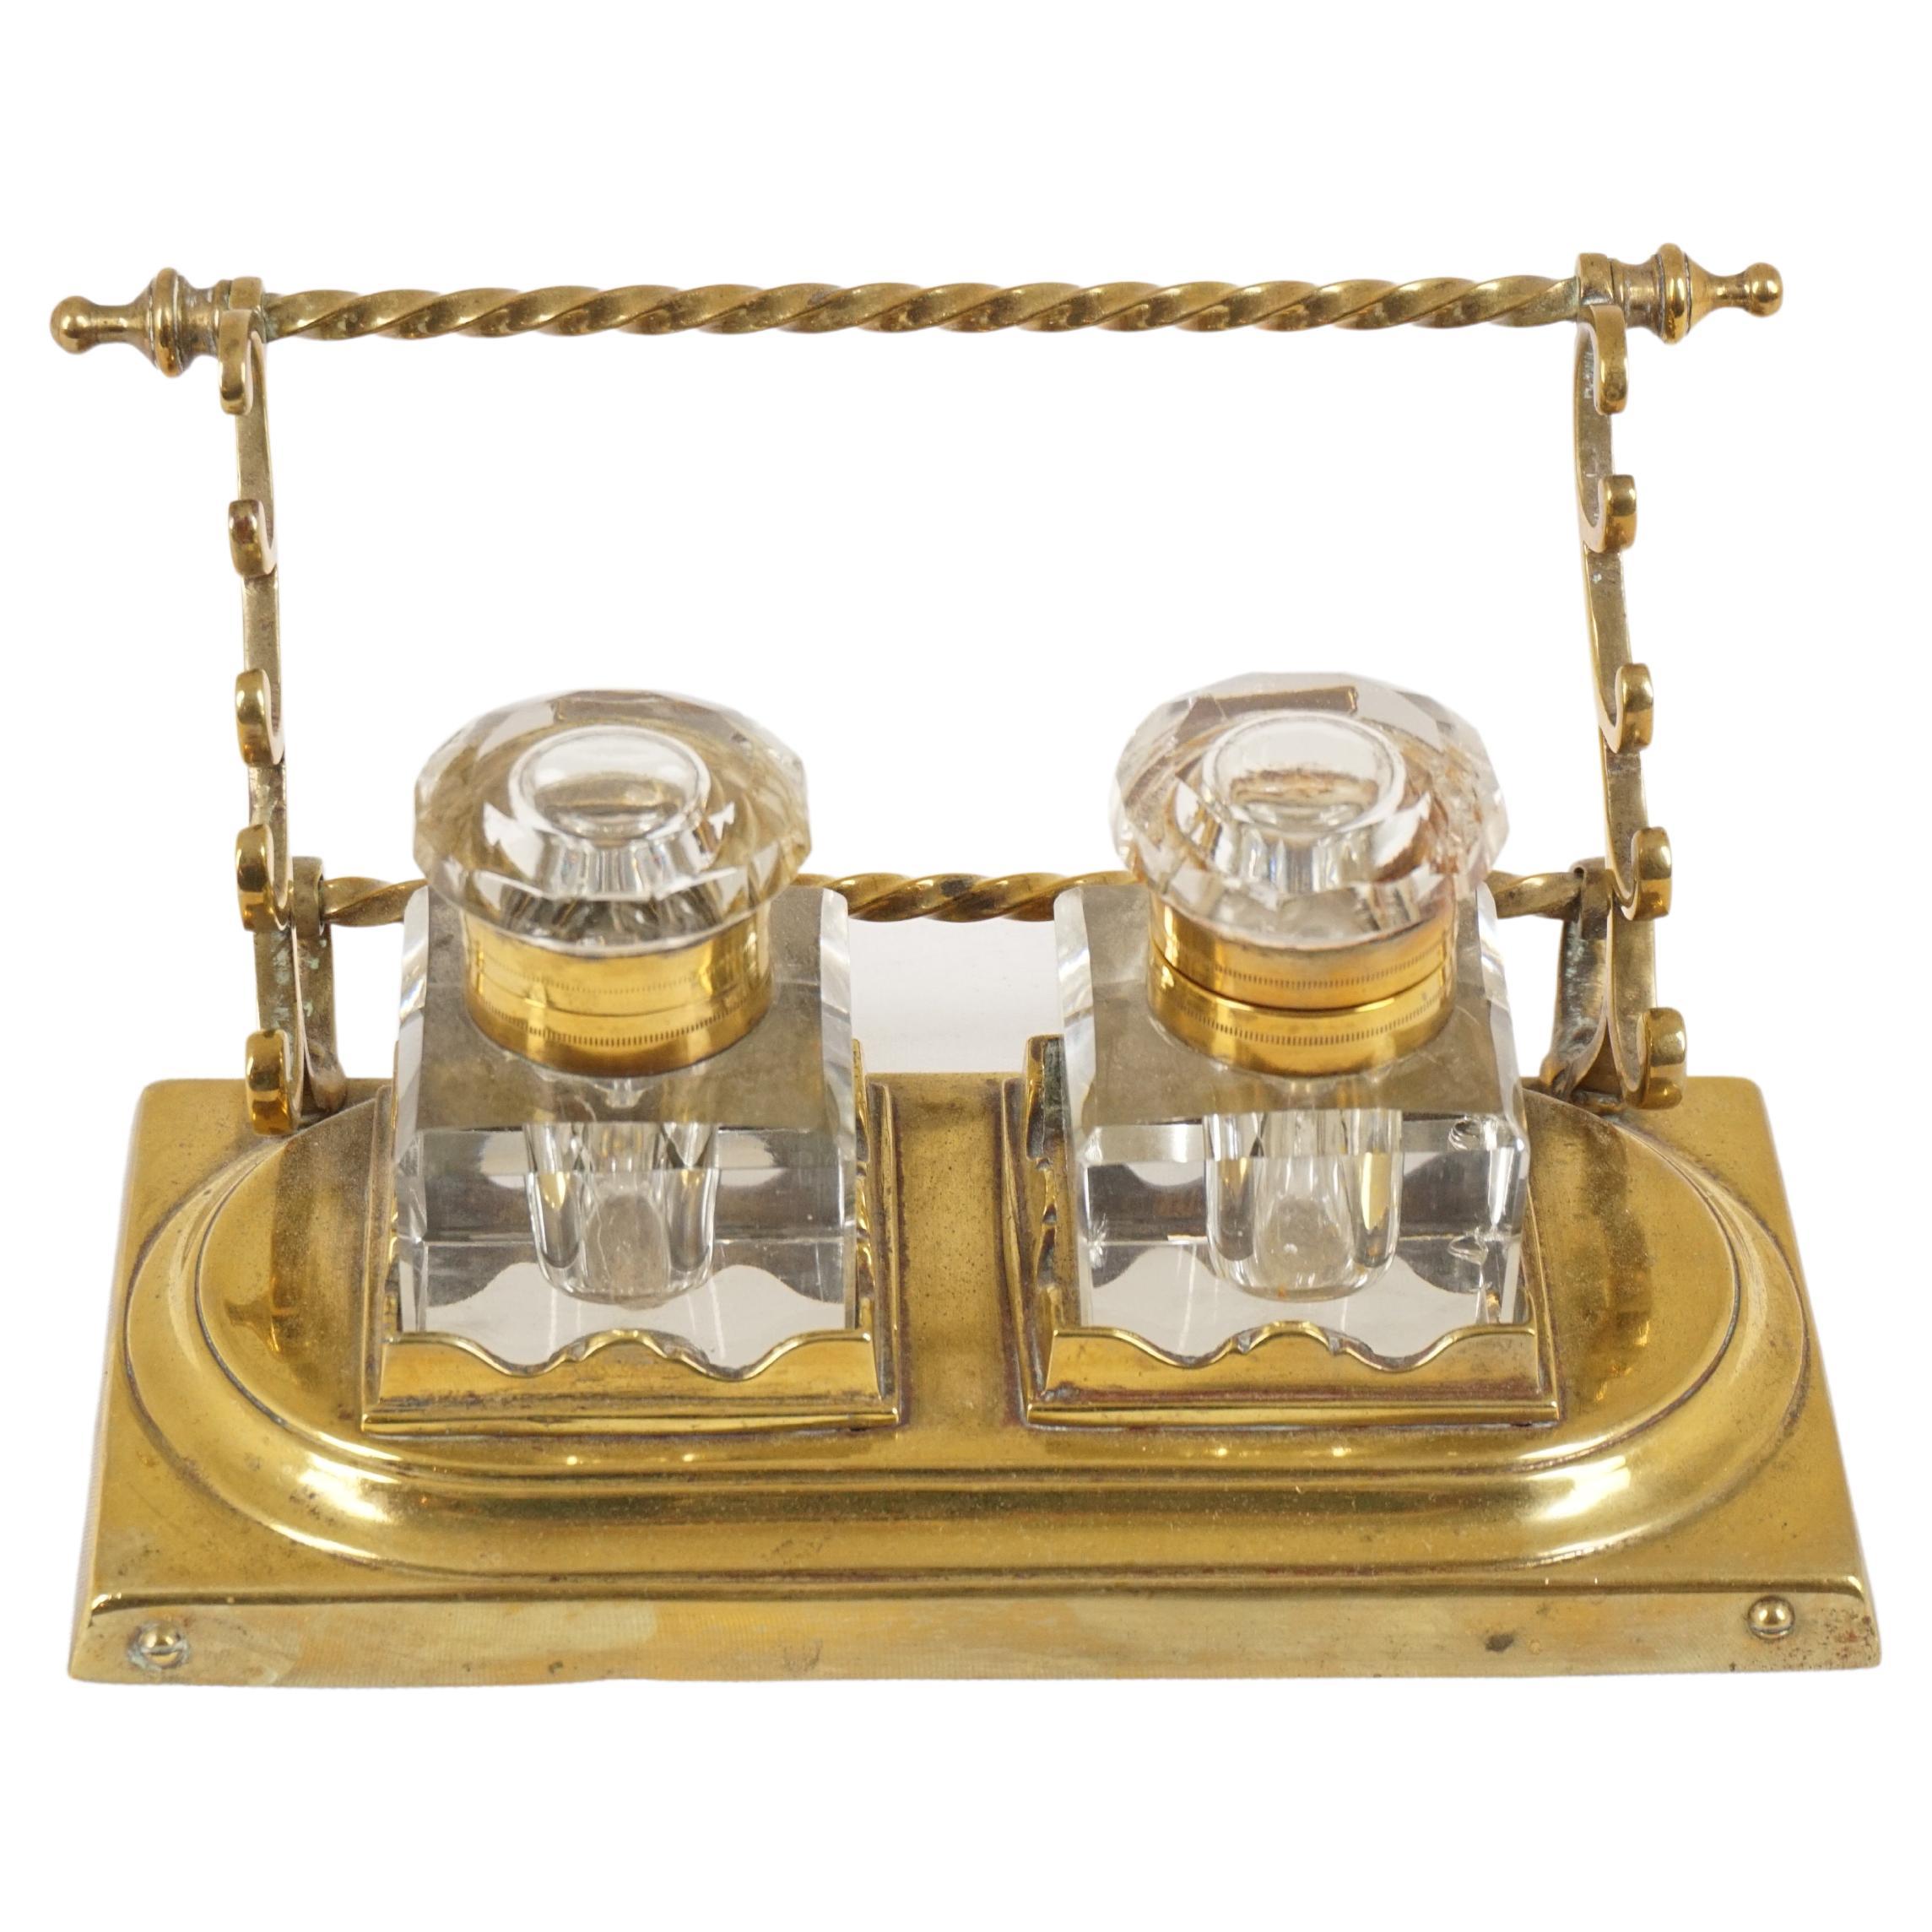 Antique Brass Double Inkstand with Pen Holders, Scotland 1900, H548